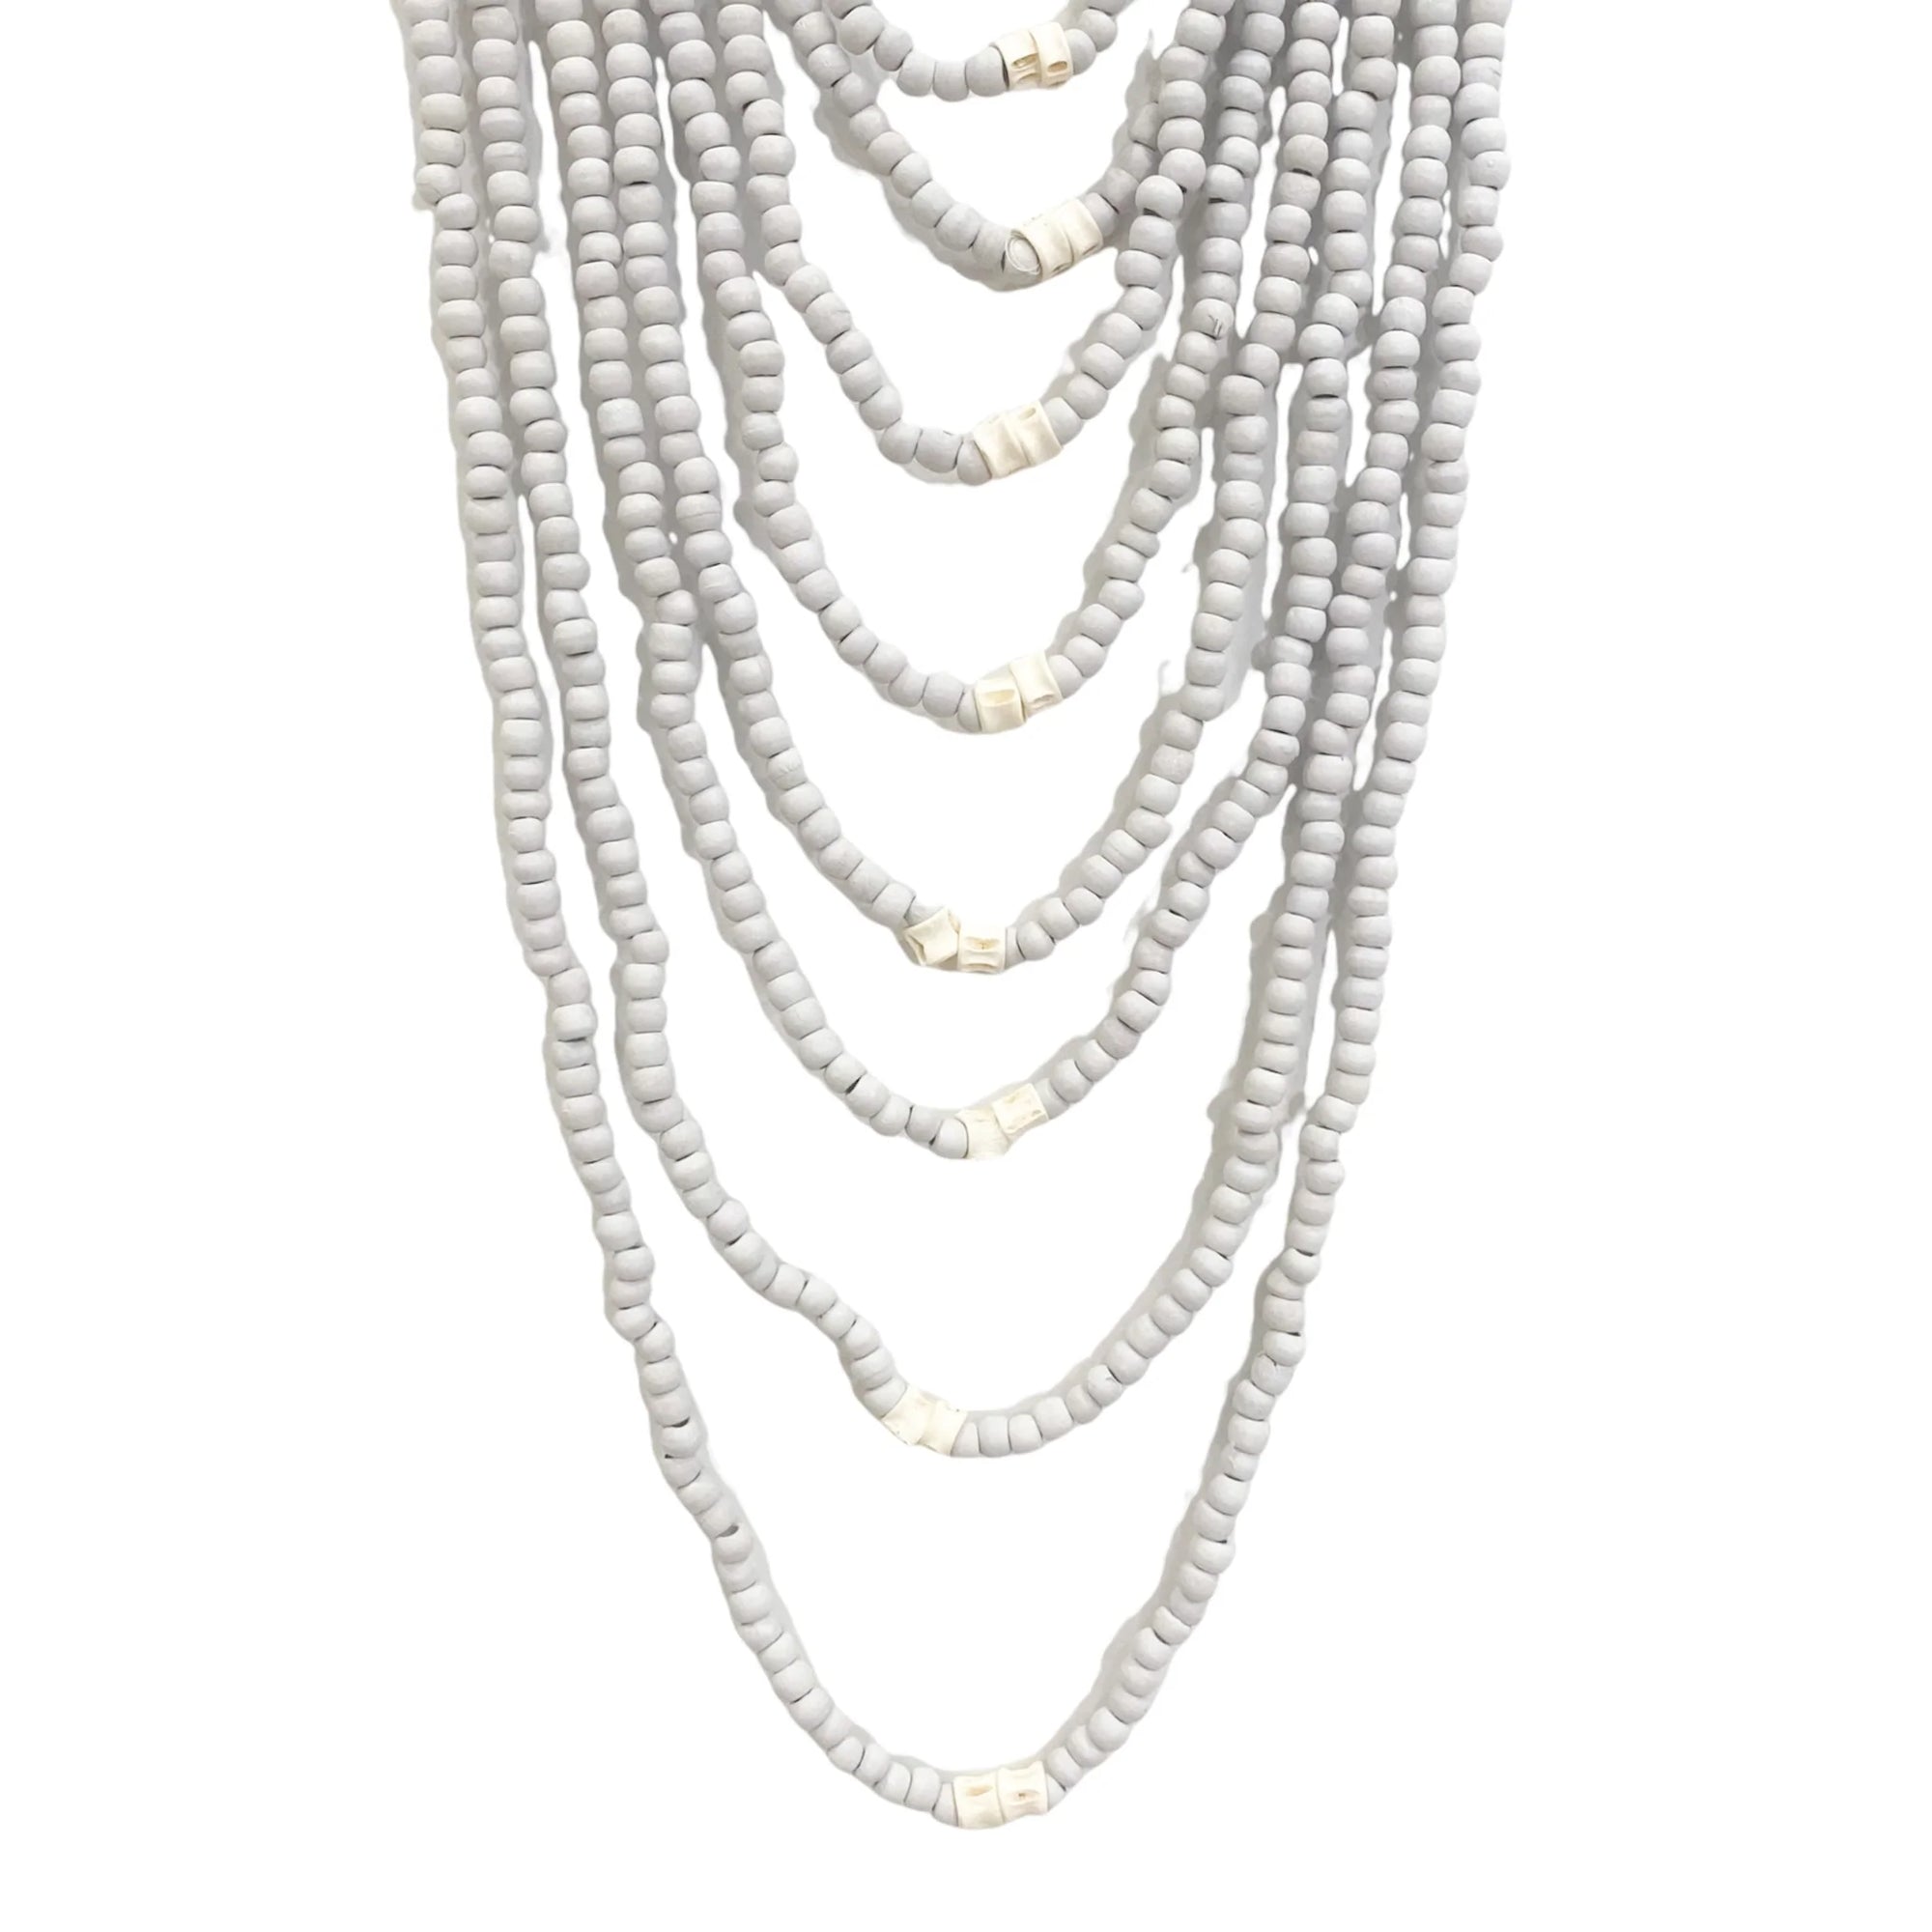 Cascade Necklace Hanging - White